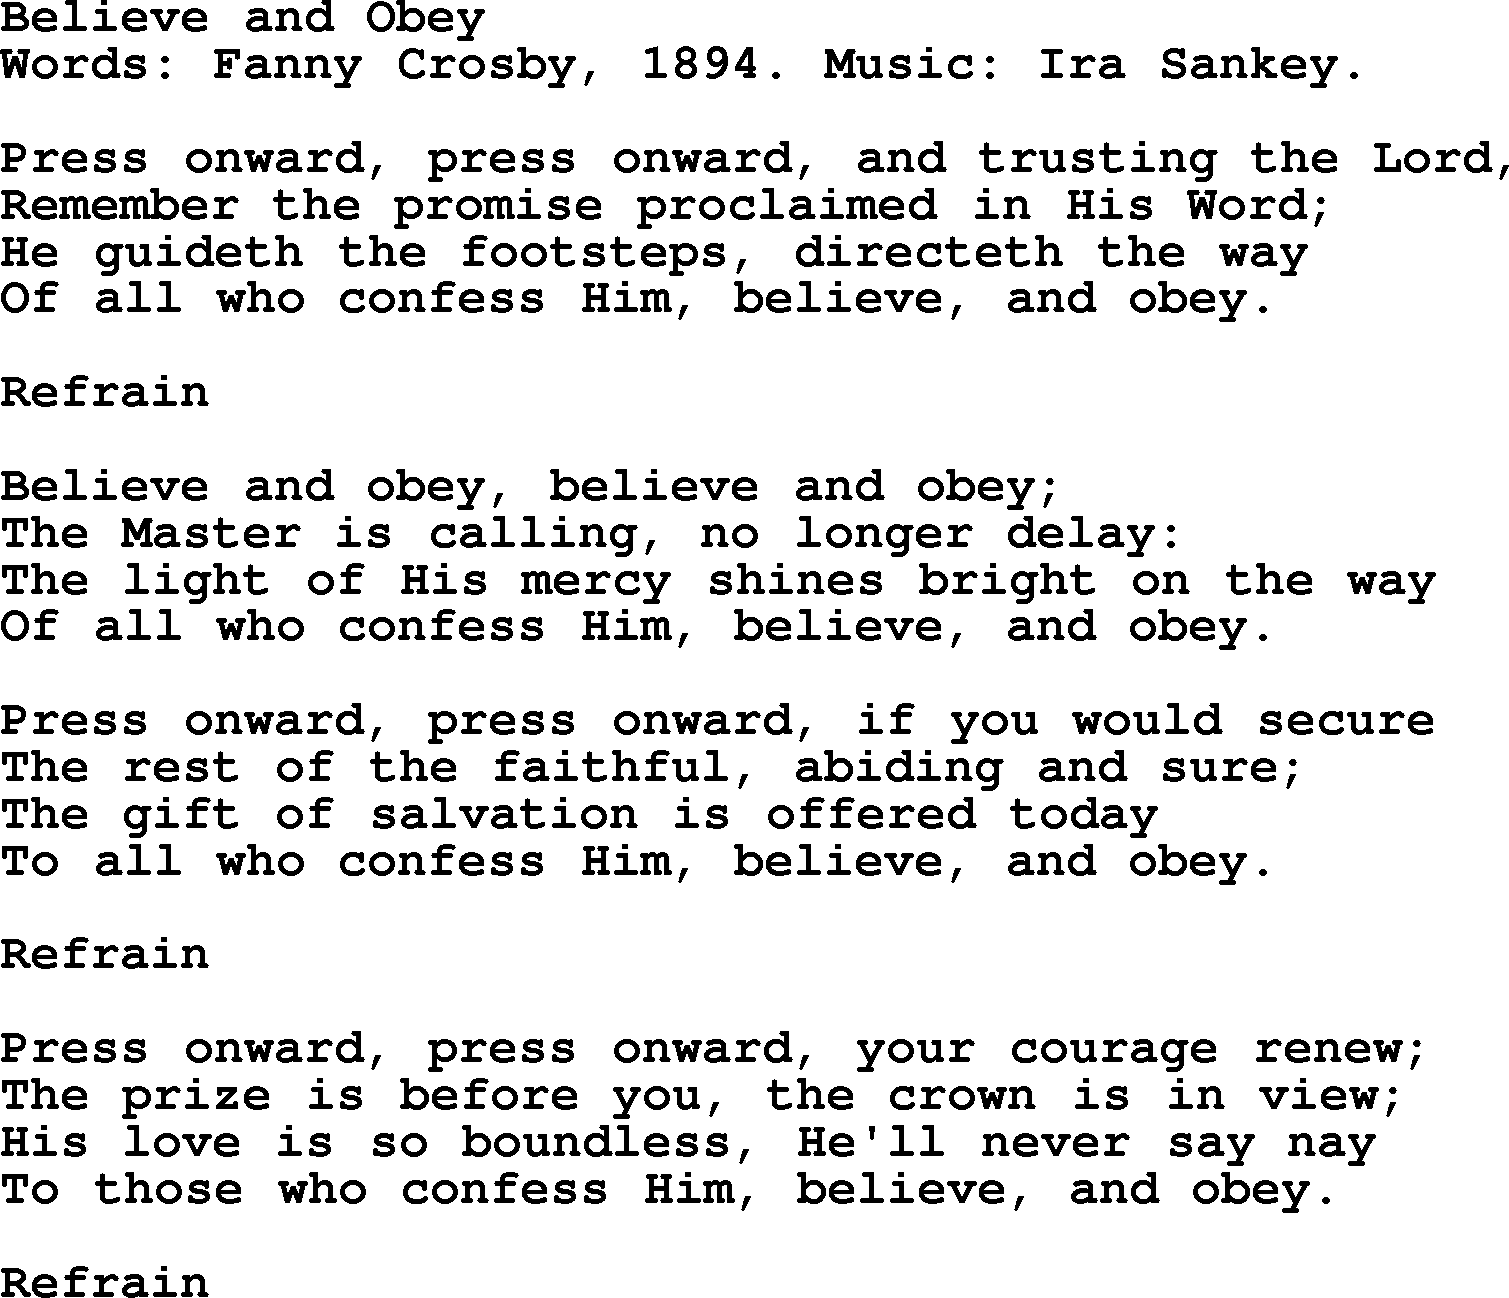 Fanny Crosby song: Believe And Obey, lyrics